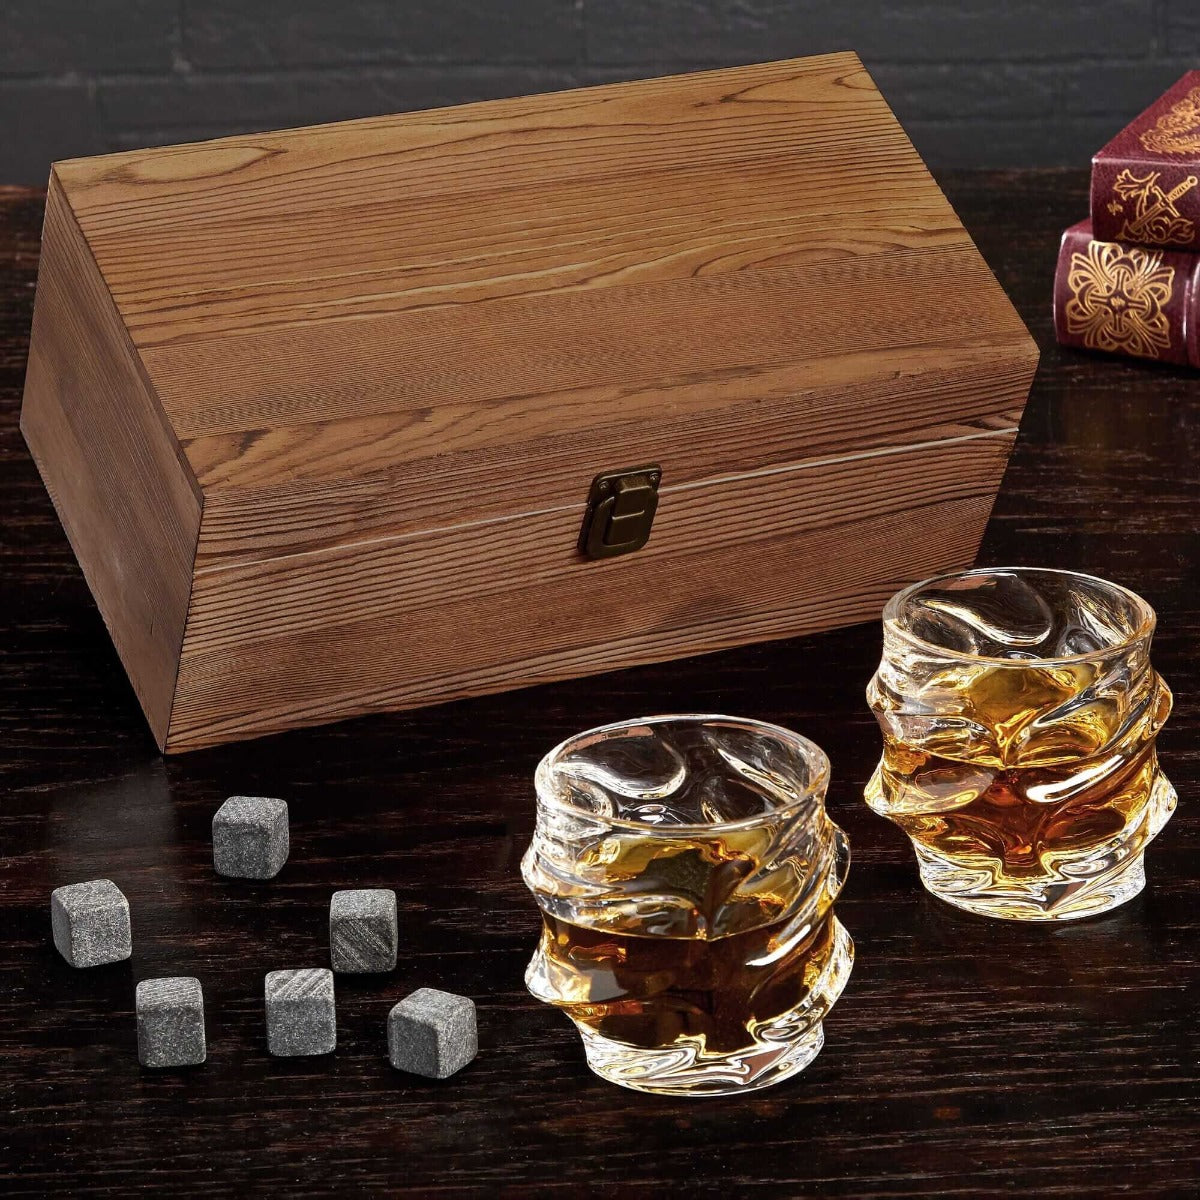 Sculpted Whiskey Glasses Boxed Set with Stones